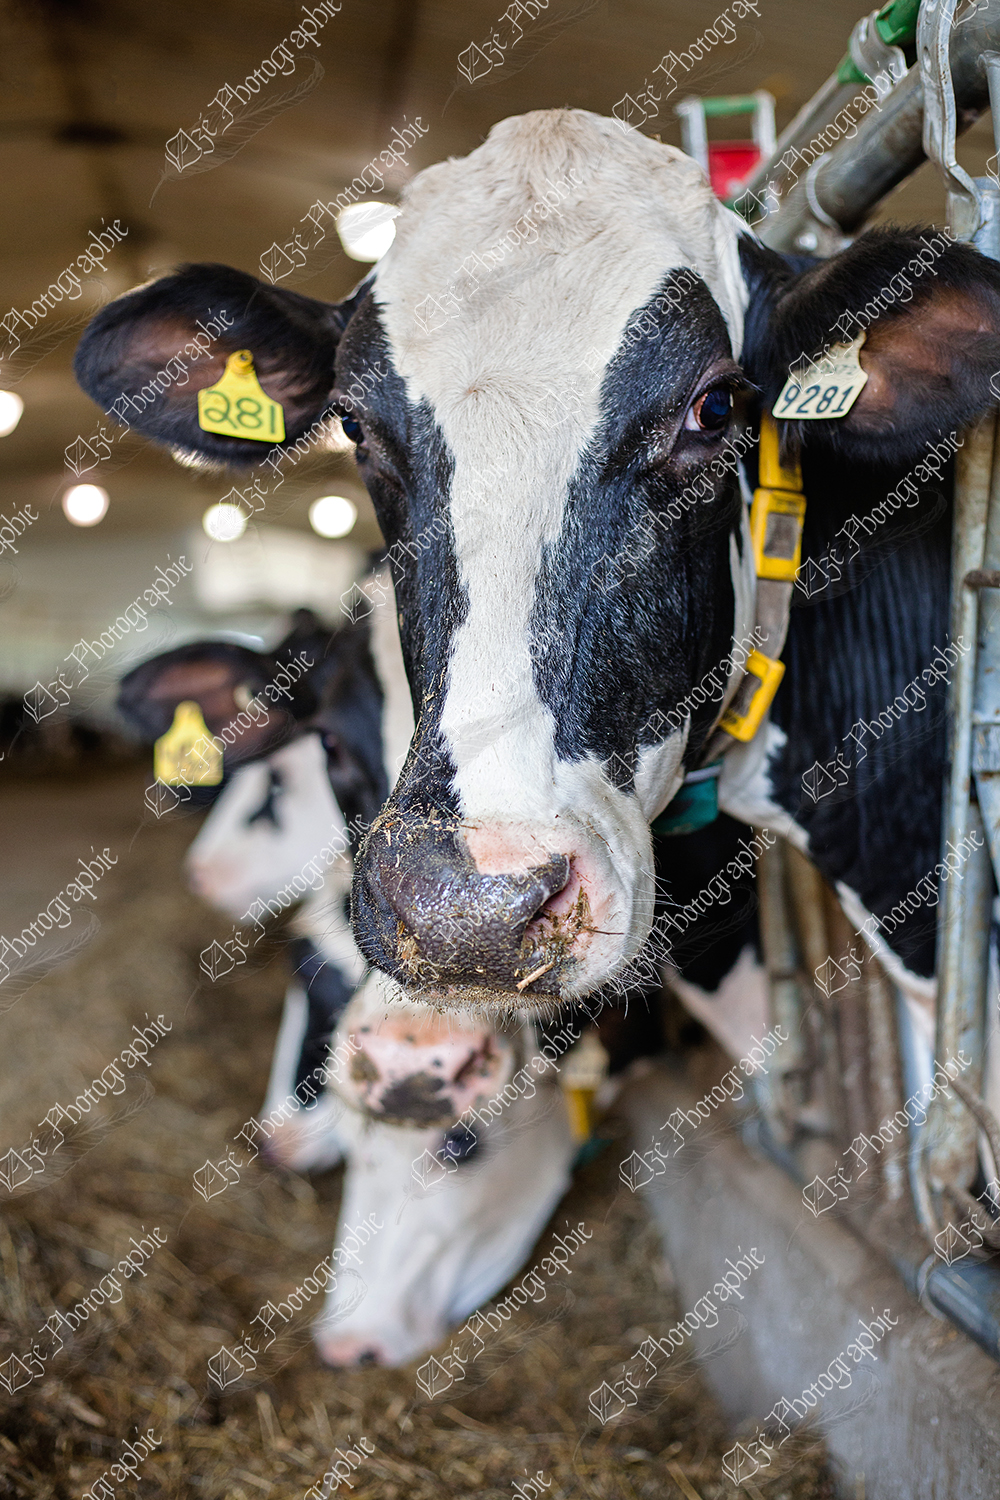 elze_photo_8600_face_vache_holstein_look_of_cow_cute